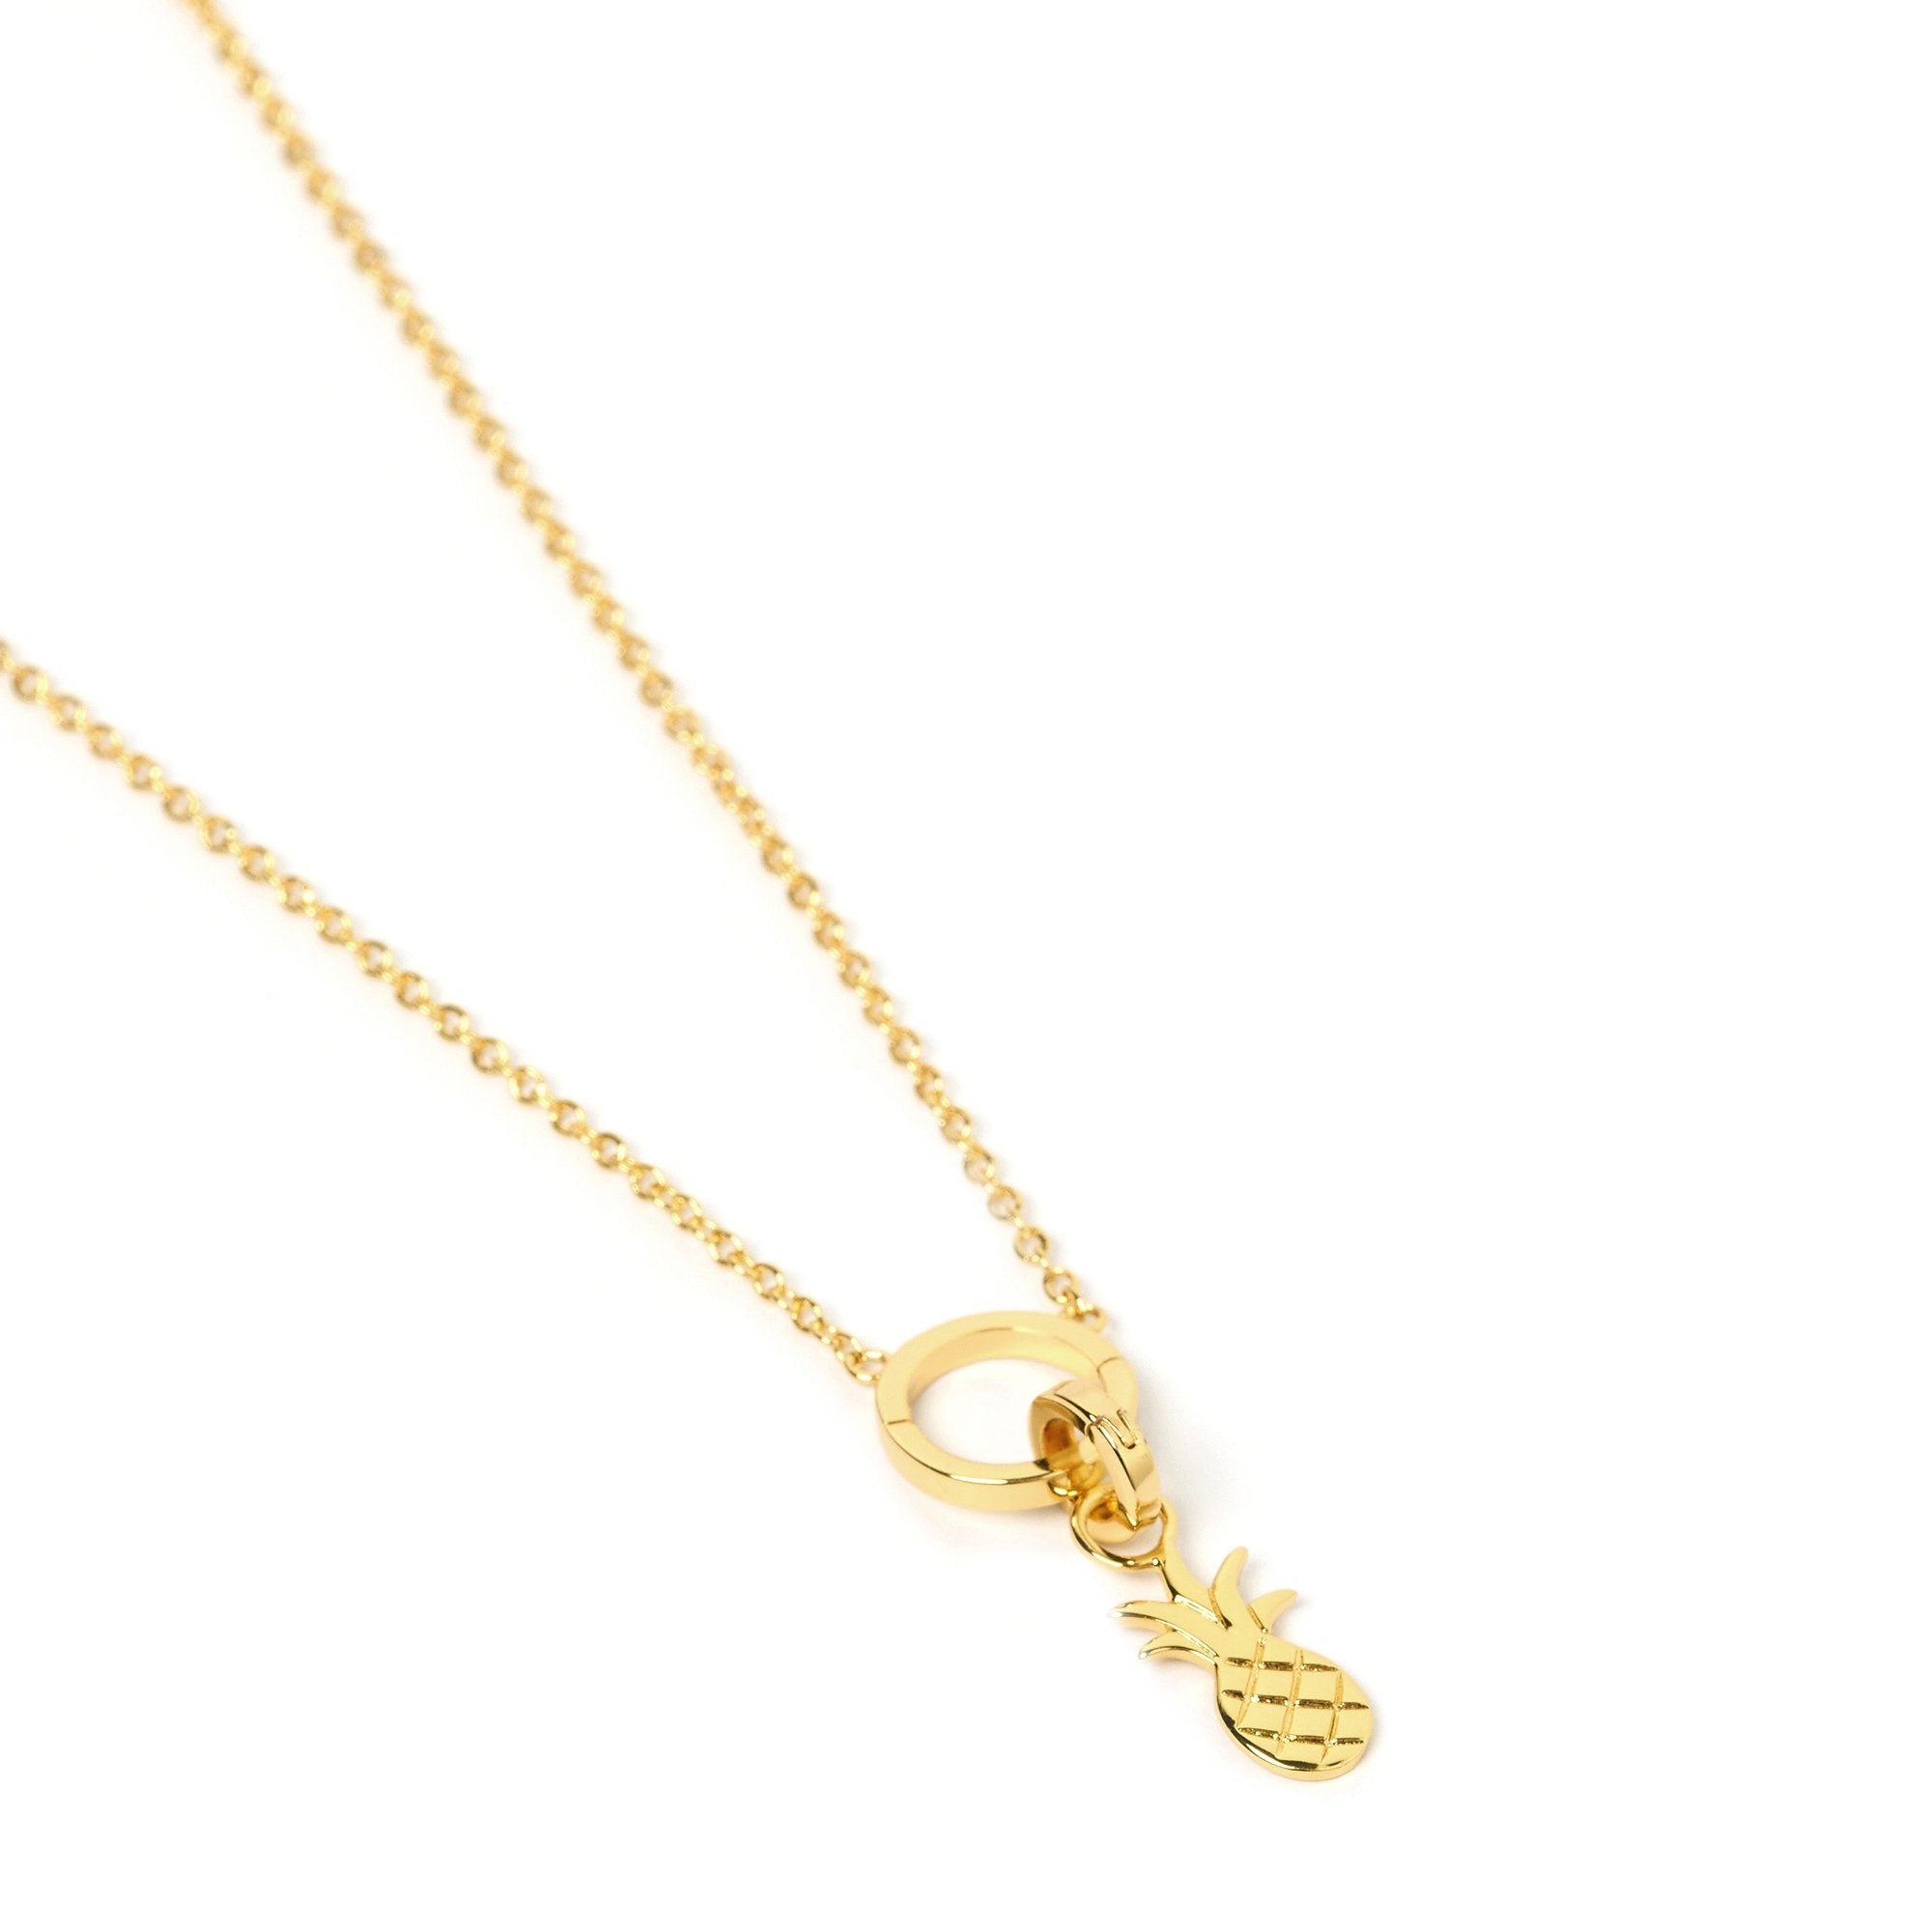 Arms Of Eve stylish gold Ananas 'O' charm necklace with pineapple charm